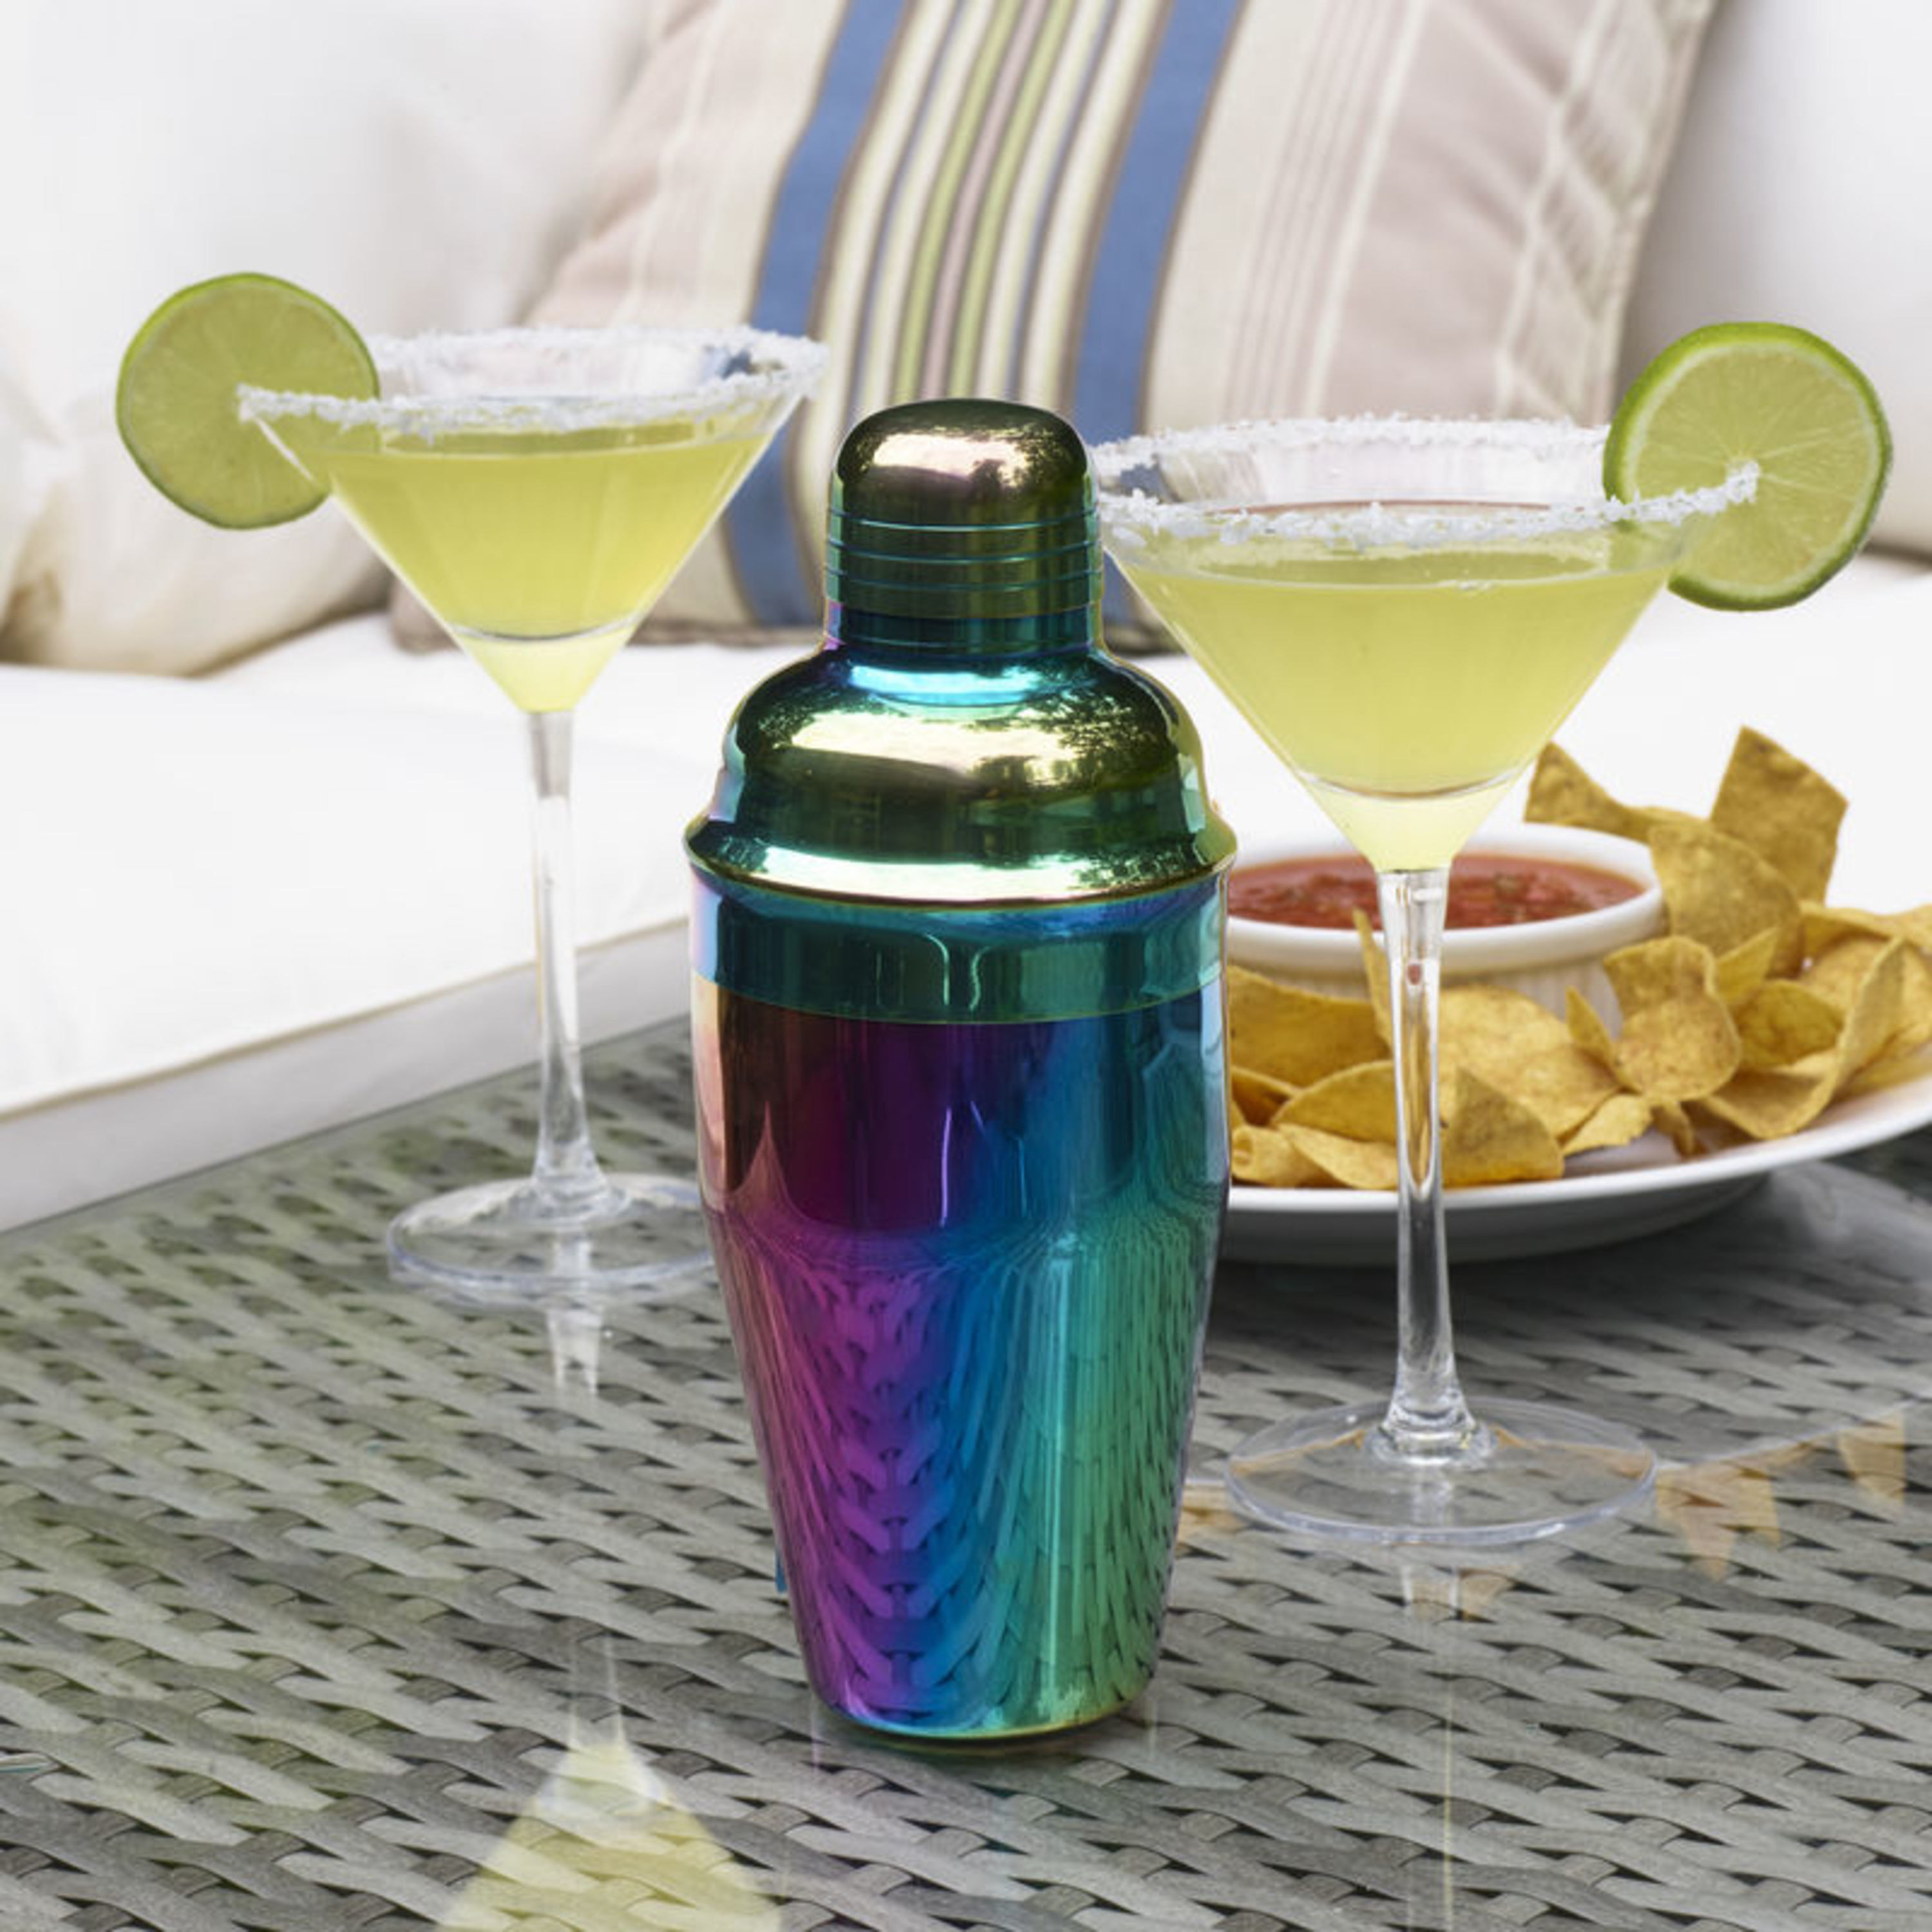 The utterly awesome iridescent shaker, in rainbow iridescent